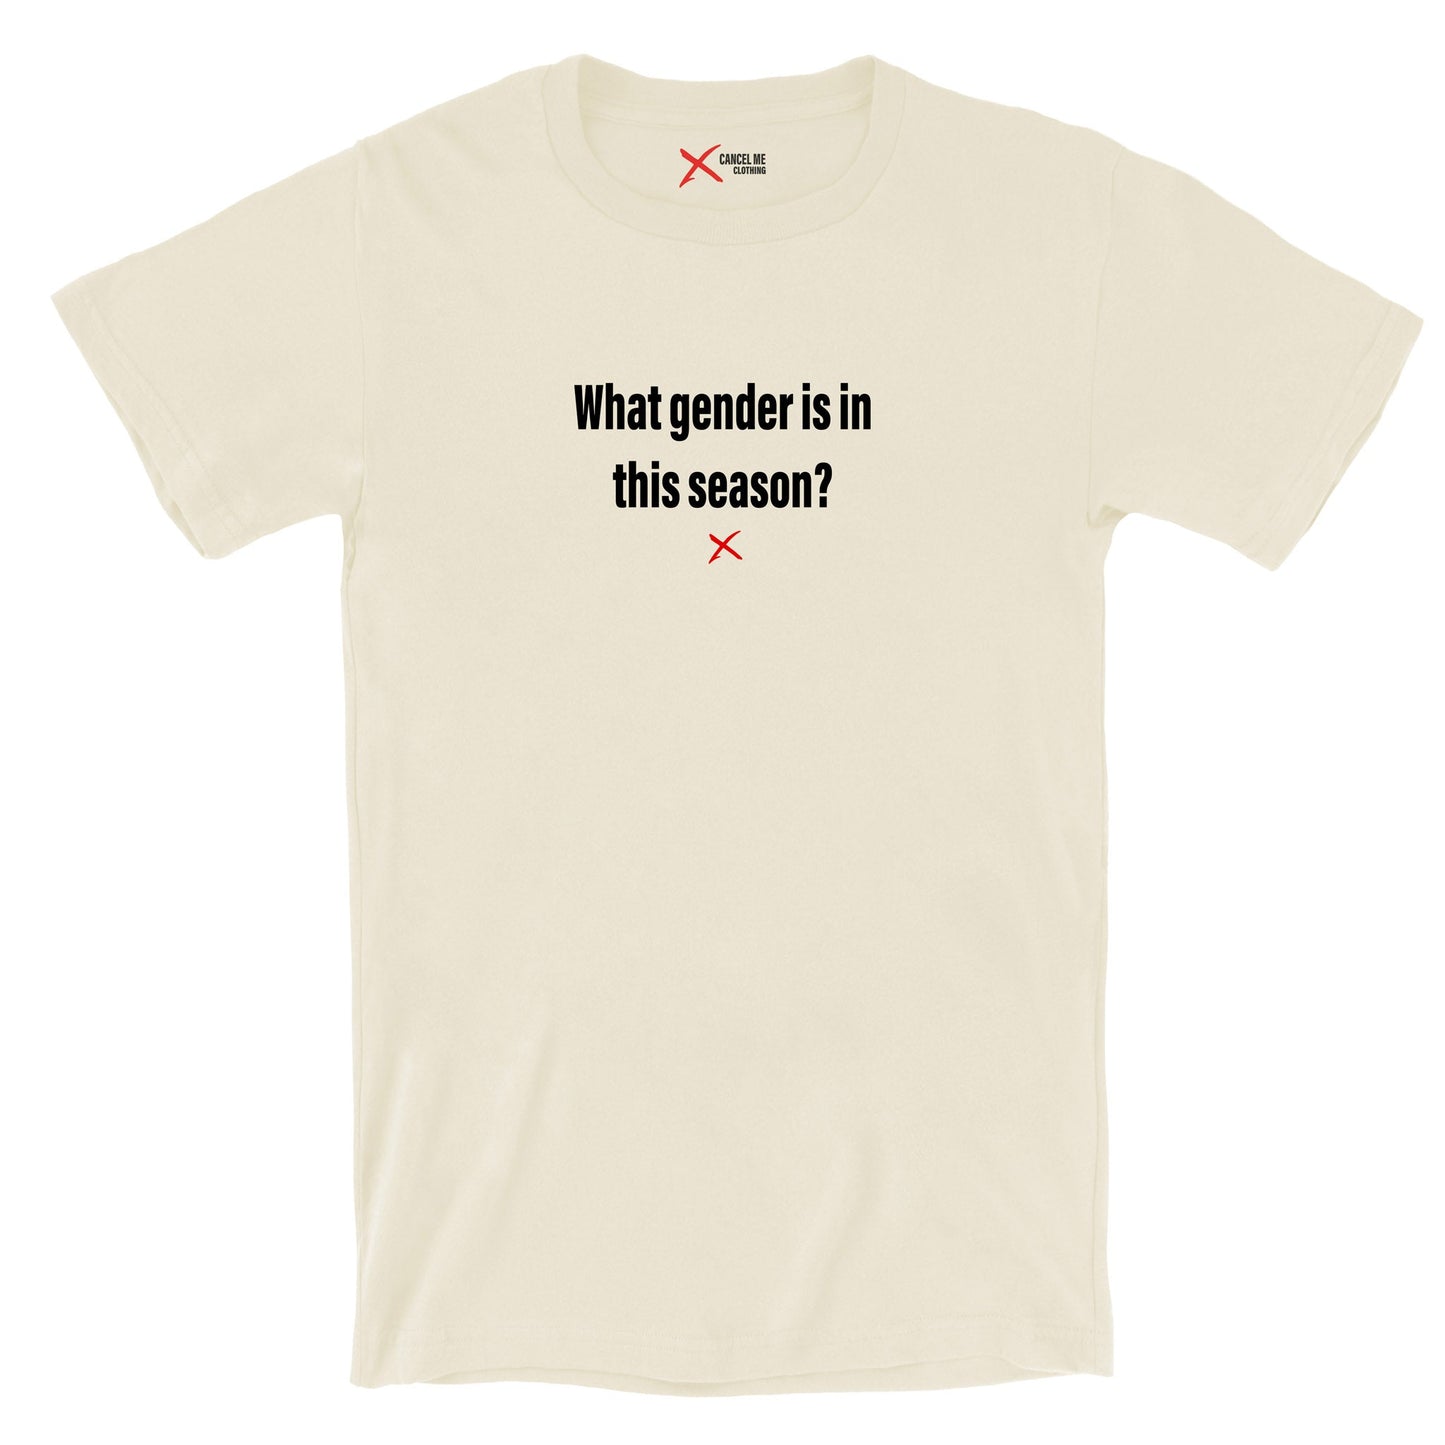 What gender is in this season? - Shirt